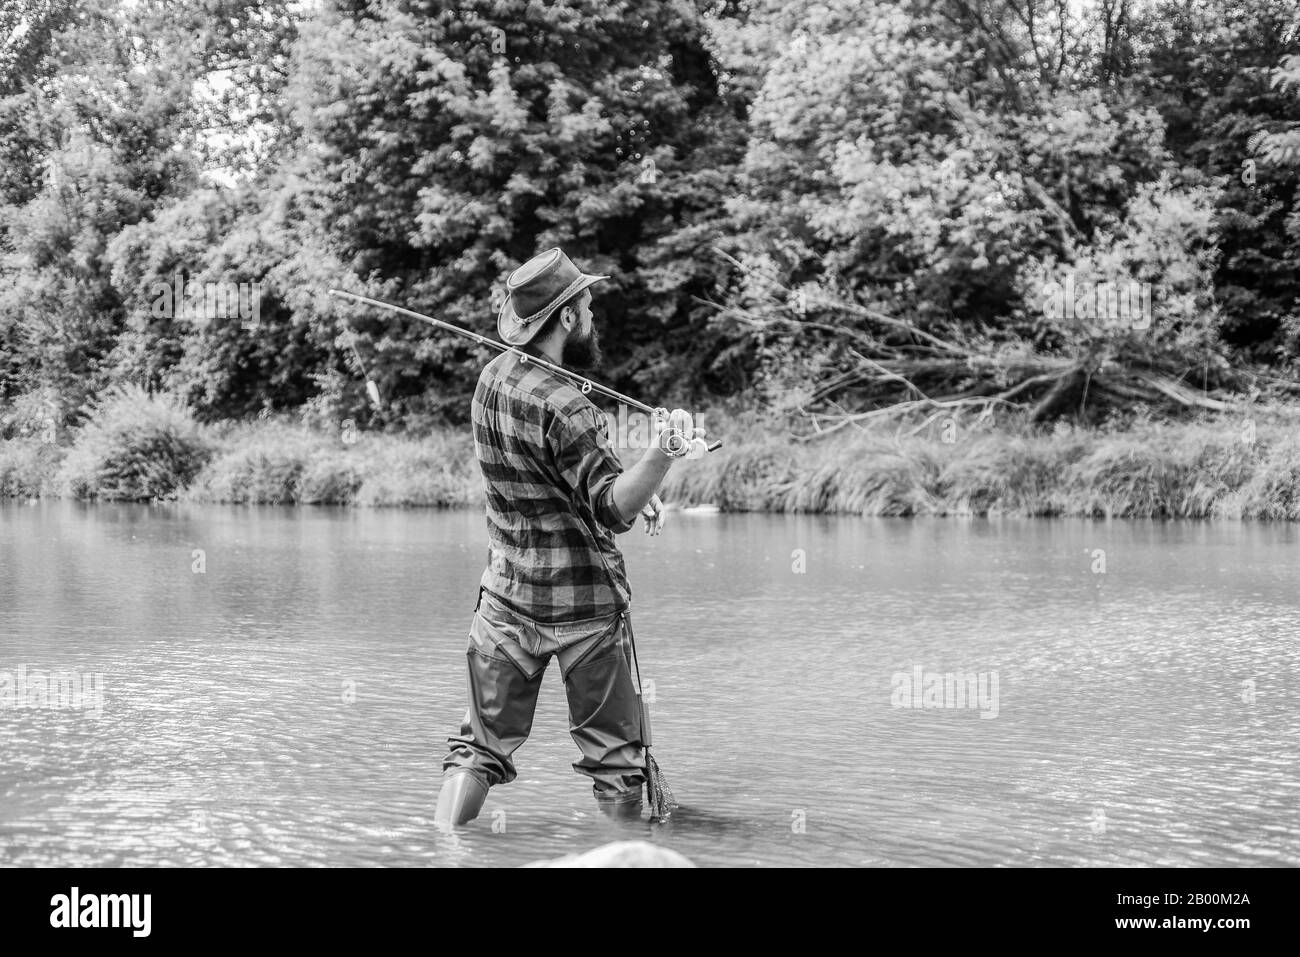 Man salmon fishing Black and White Stock Photos & Images - Page 2